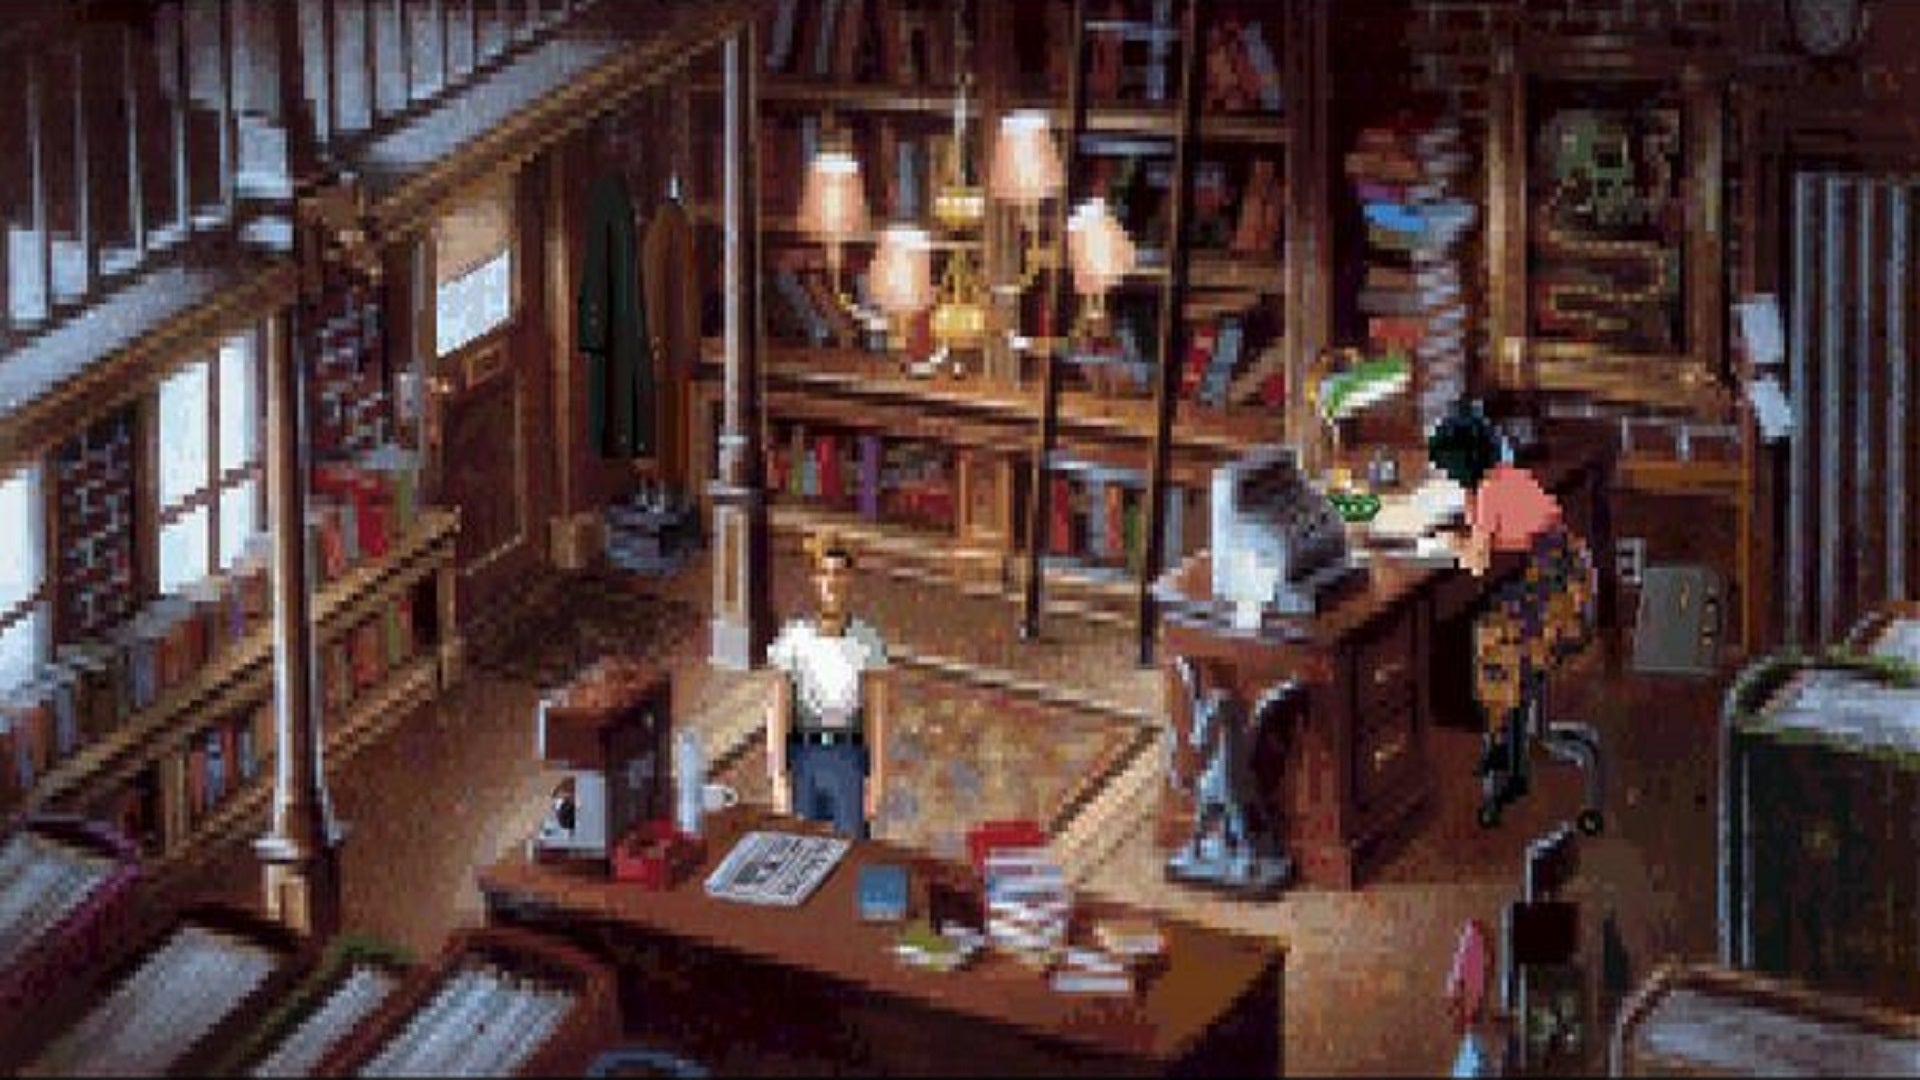 A Pixel-art image of an overcrowded bookshop. A man stands at the counter reading a newspaper, while a woman sits behind a desk nearby.